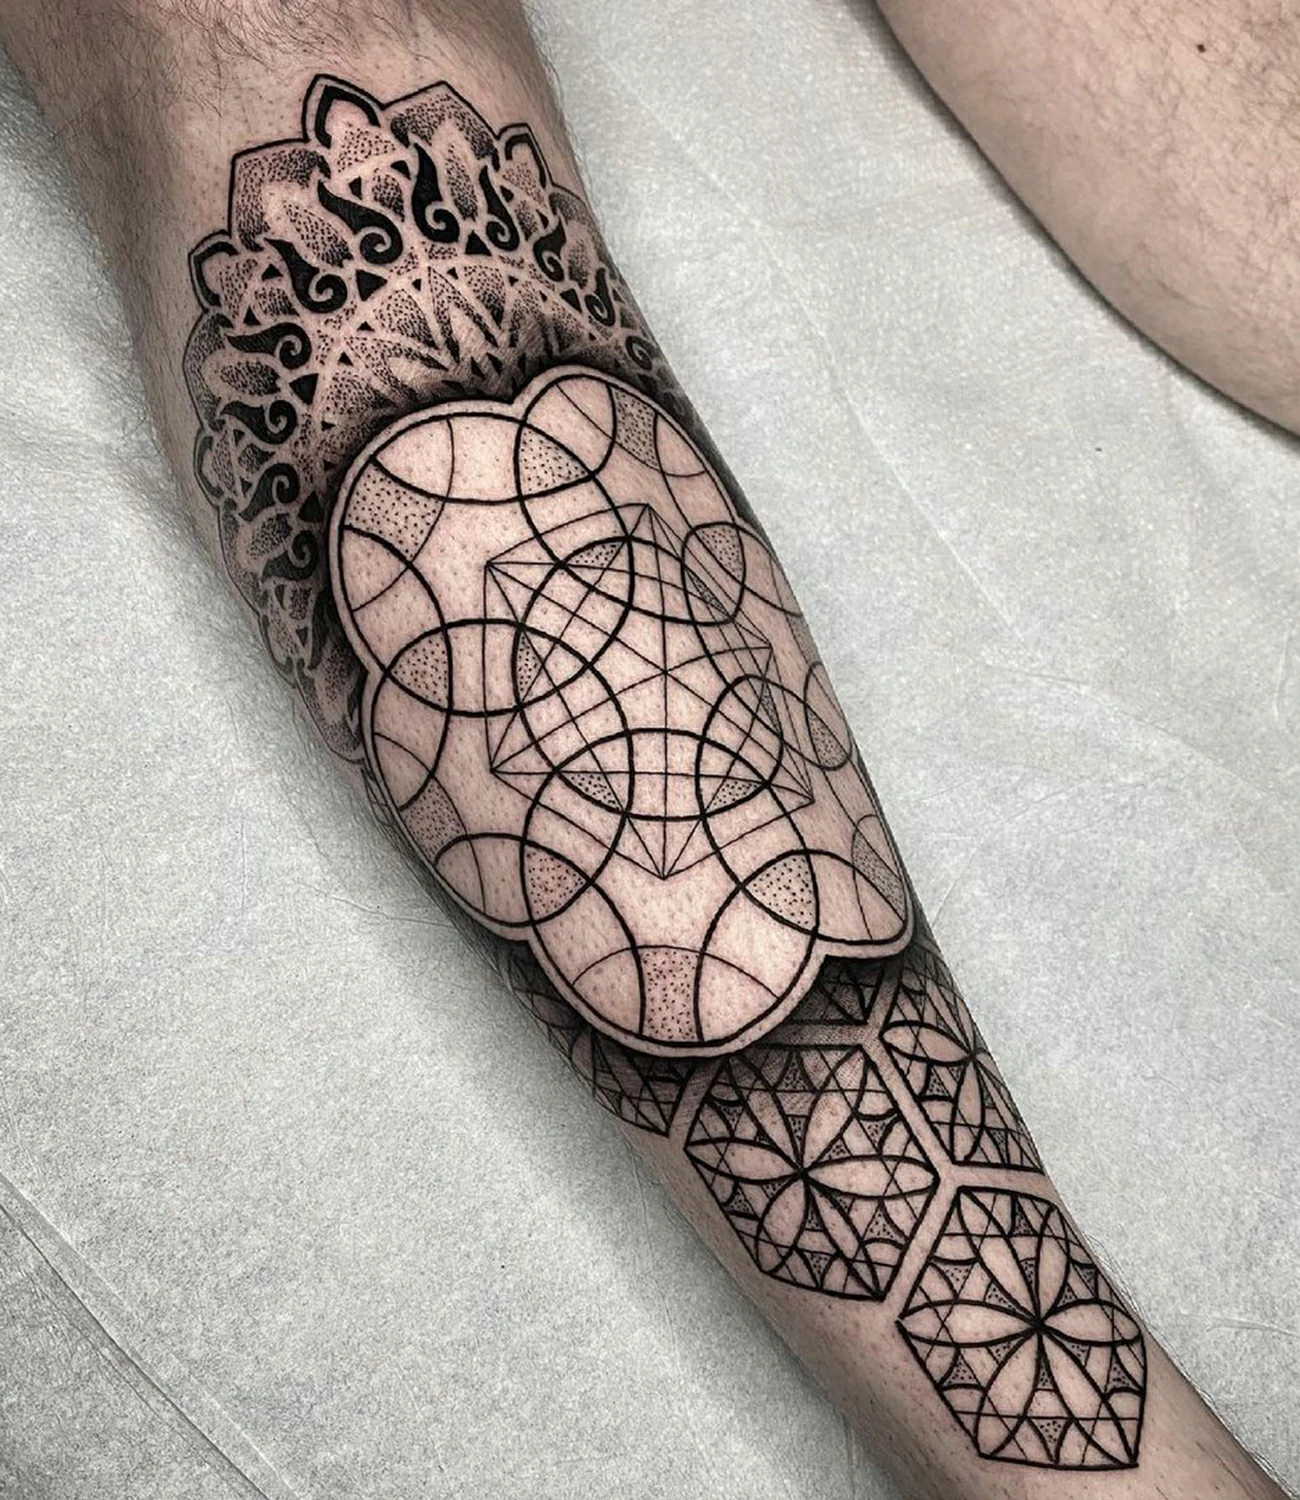 Geometric Tattoo Designs: Geometric tattoo designs incorporate symmetrical shapes and patterns to create visually striking and meaningful body art.